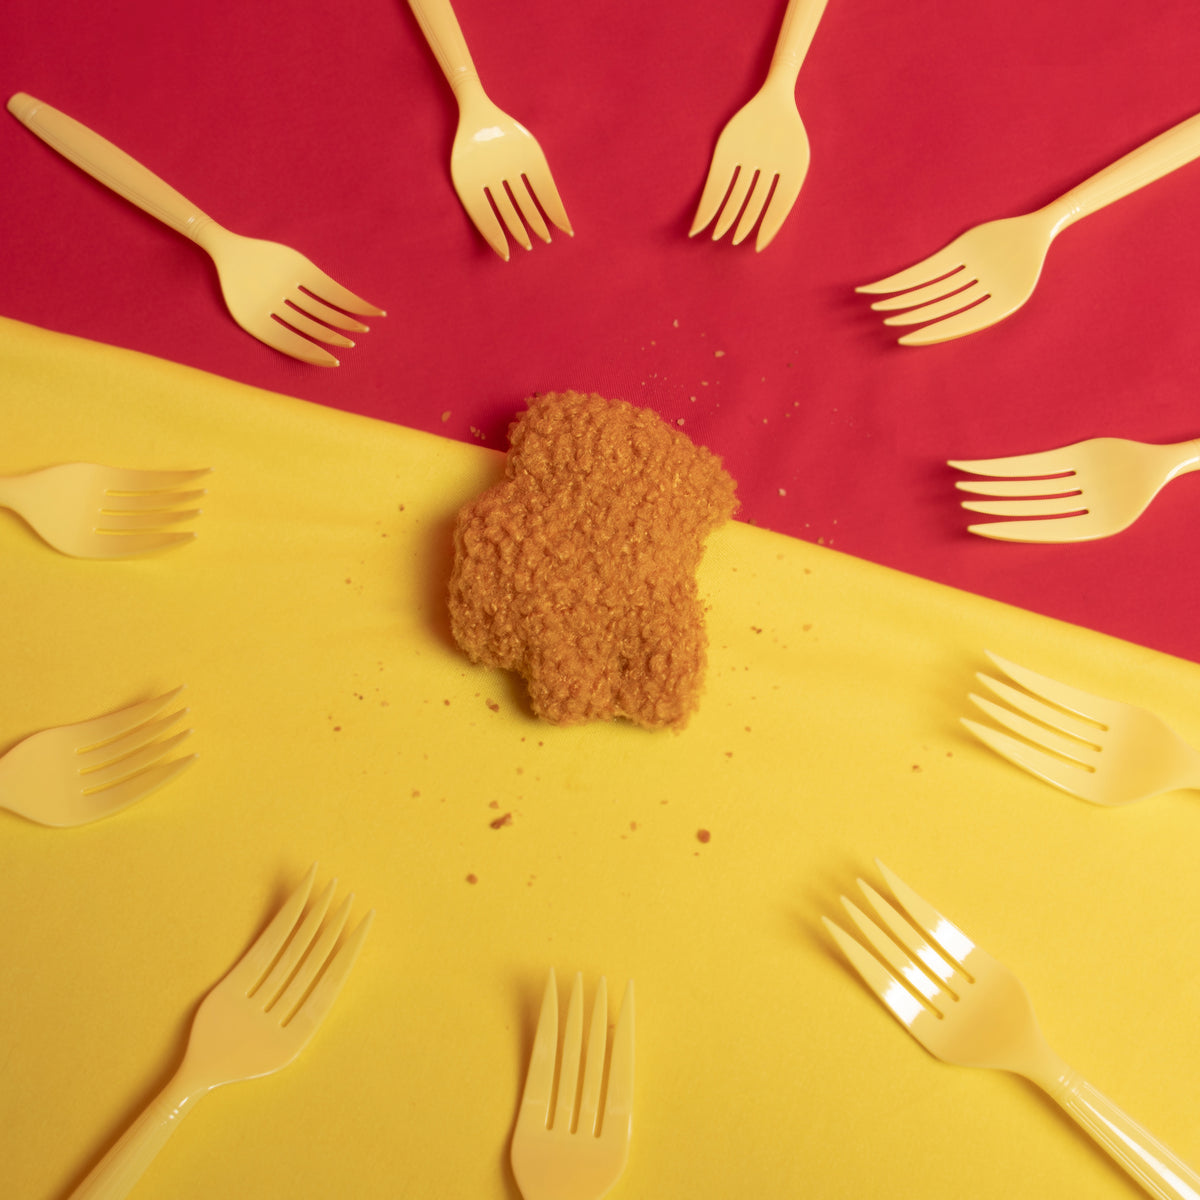 An overhead shot of the Crewmate chicken nugget surrounded by a circle of plastic forks against a red and yellow background. 